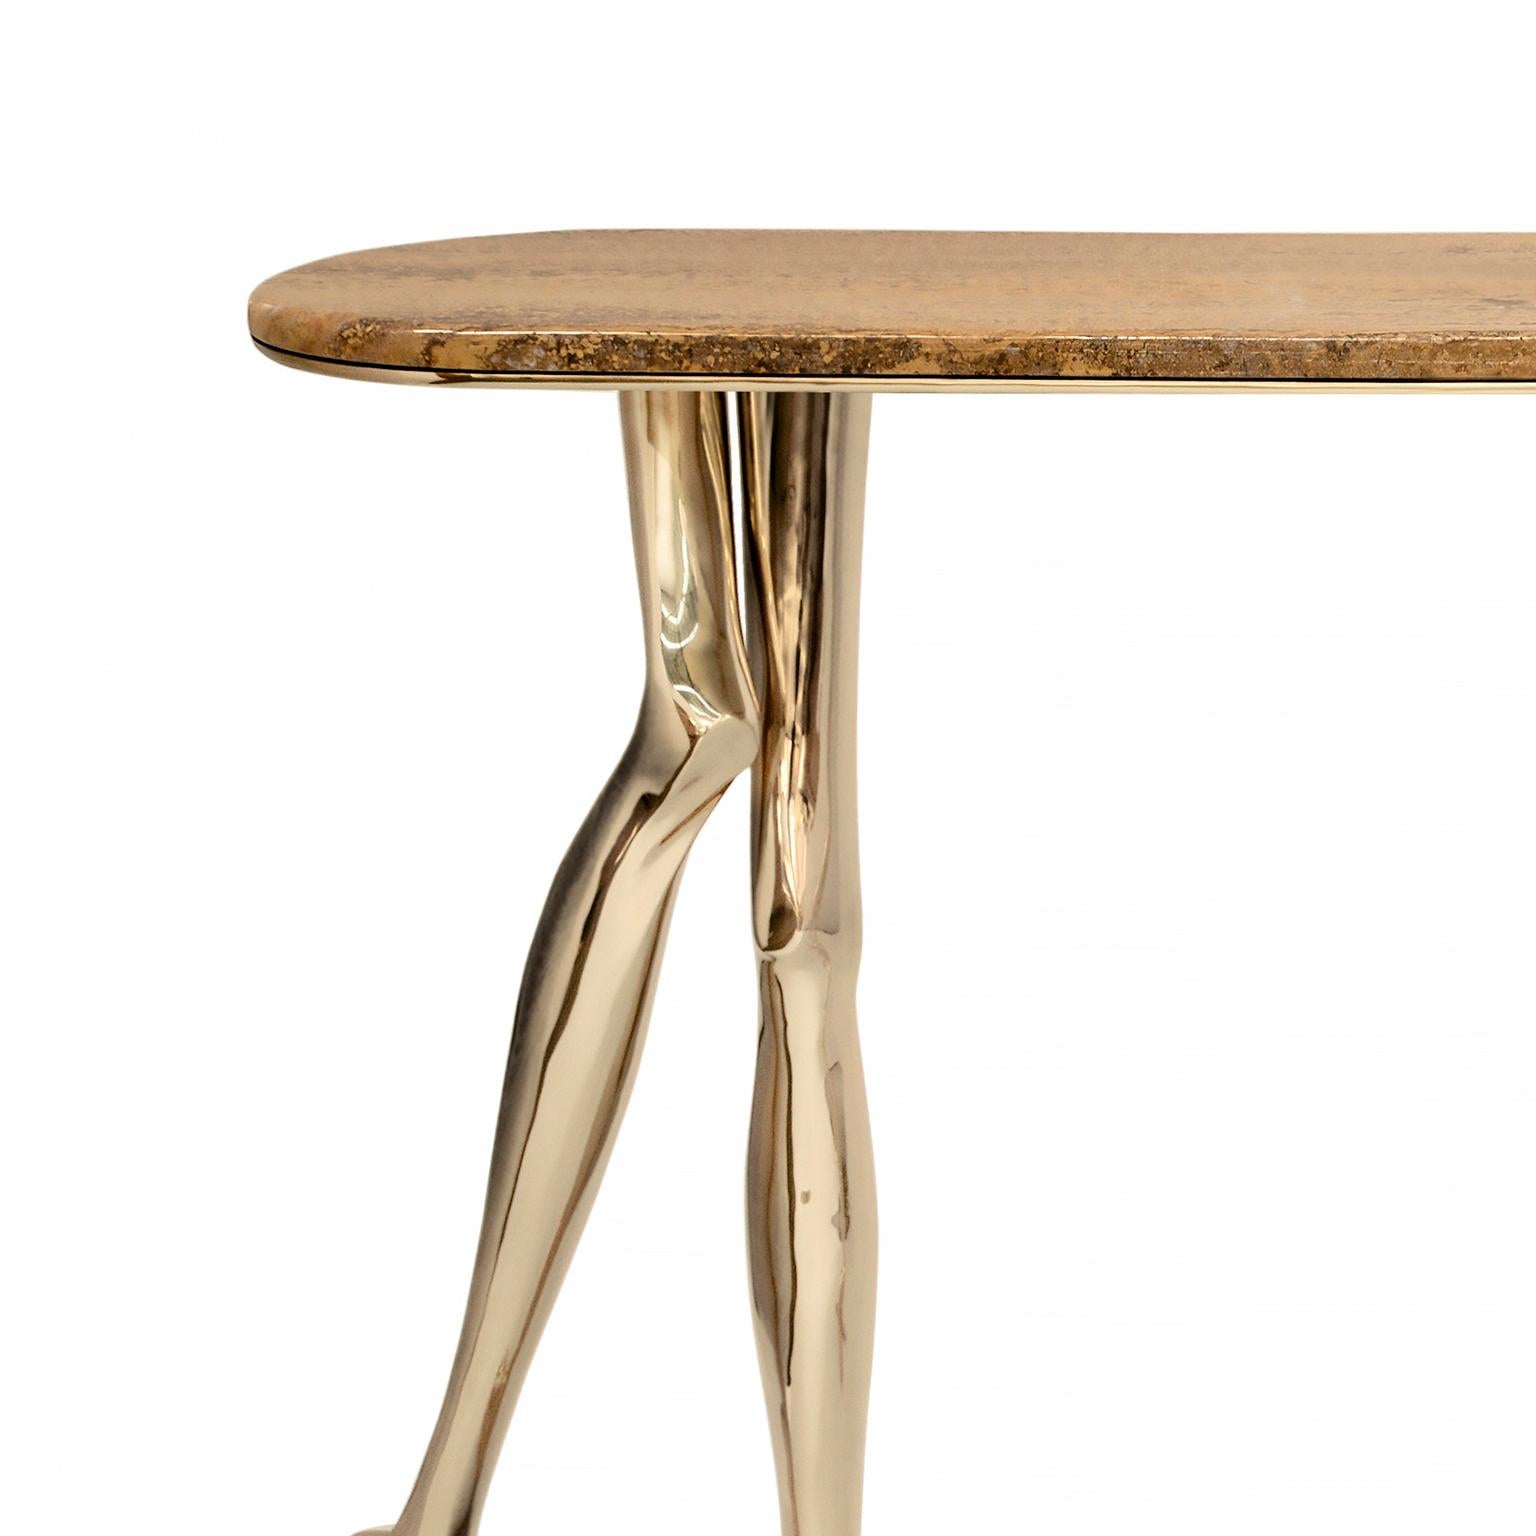 Modern Contemporary Monroe Console Table, Polished Brass, Yellow Travertine Marble For Sale